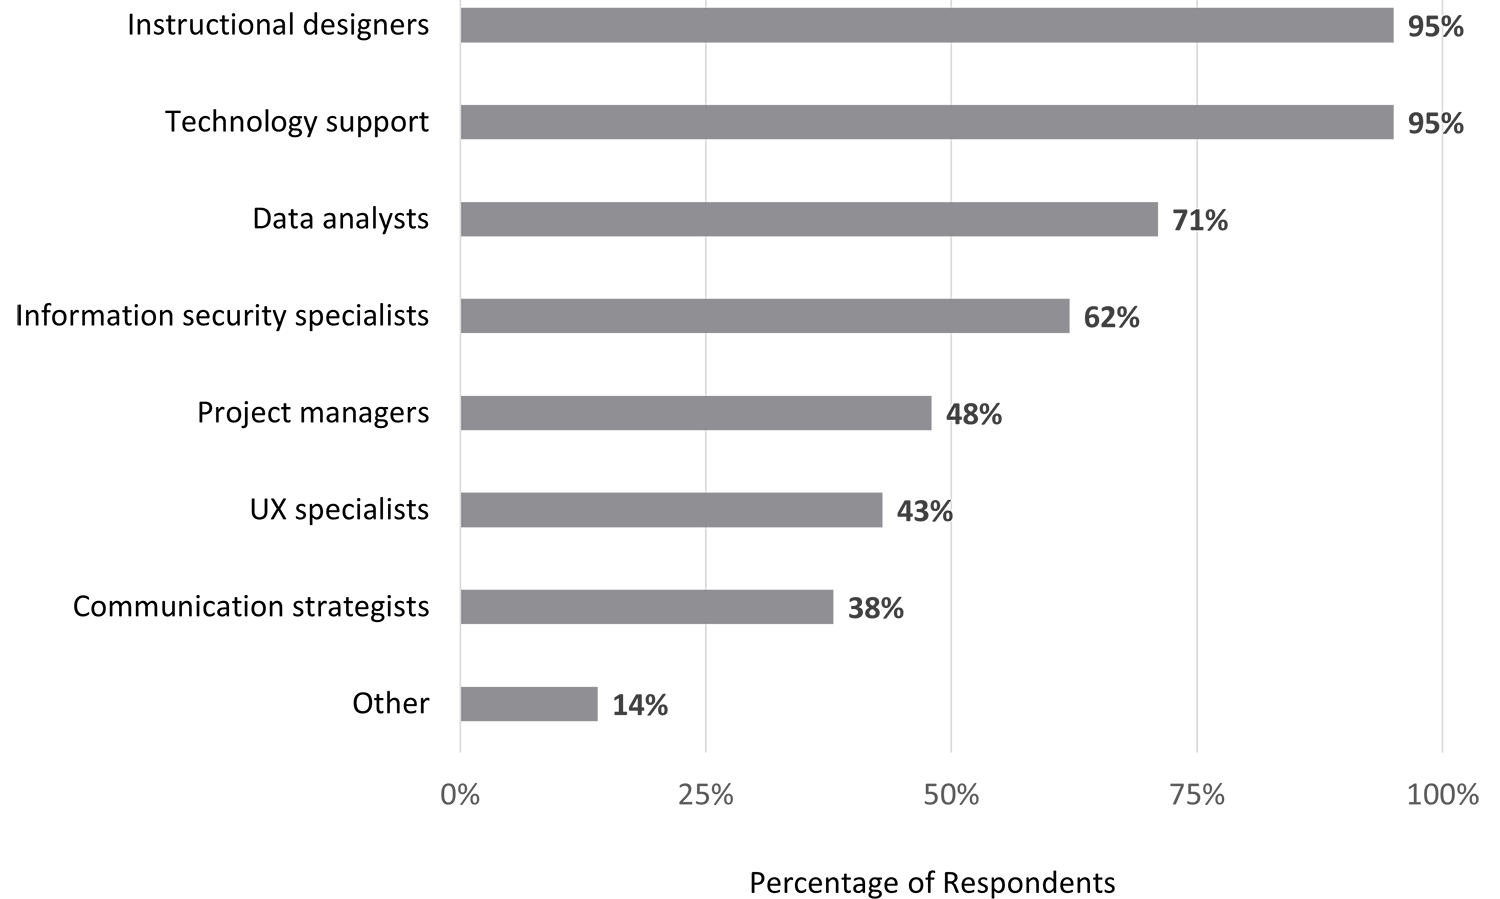 Bar chart showing the importance of support from specific types of staff roles for an institution’s DLS. For instructional designers and technology support, 95% of respondents said support from these groups was important. For data analysts, 71% said support was important; information security specialists, 62%; project managers, 48%; UX specialists, 43%; communication strategists, 38%; and other staff, 14%